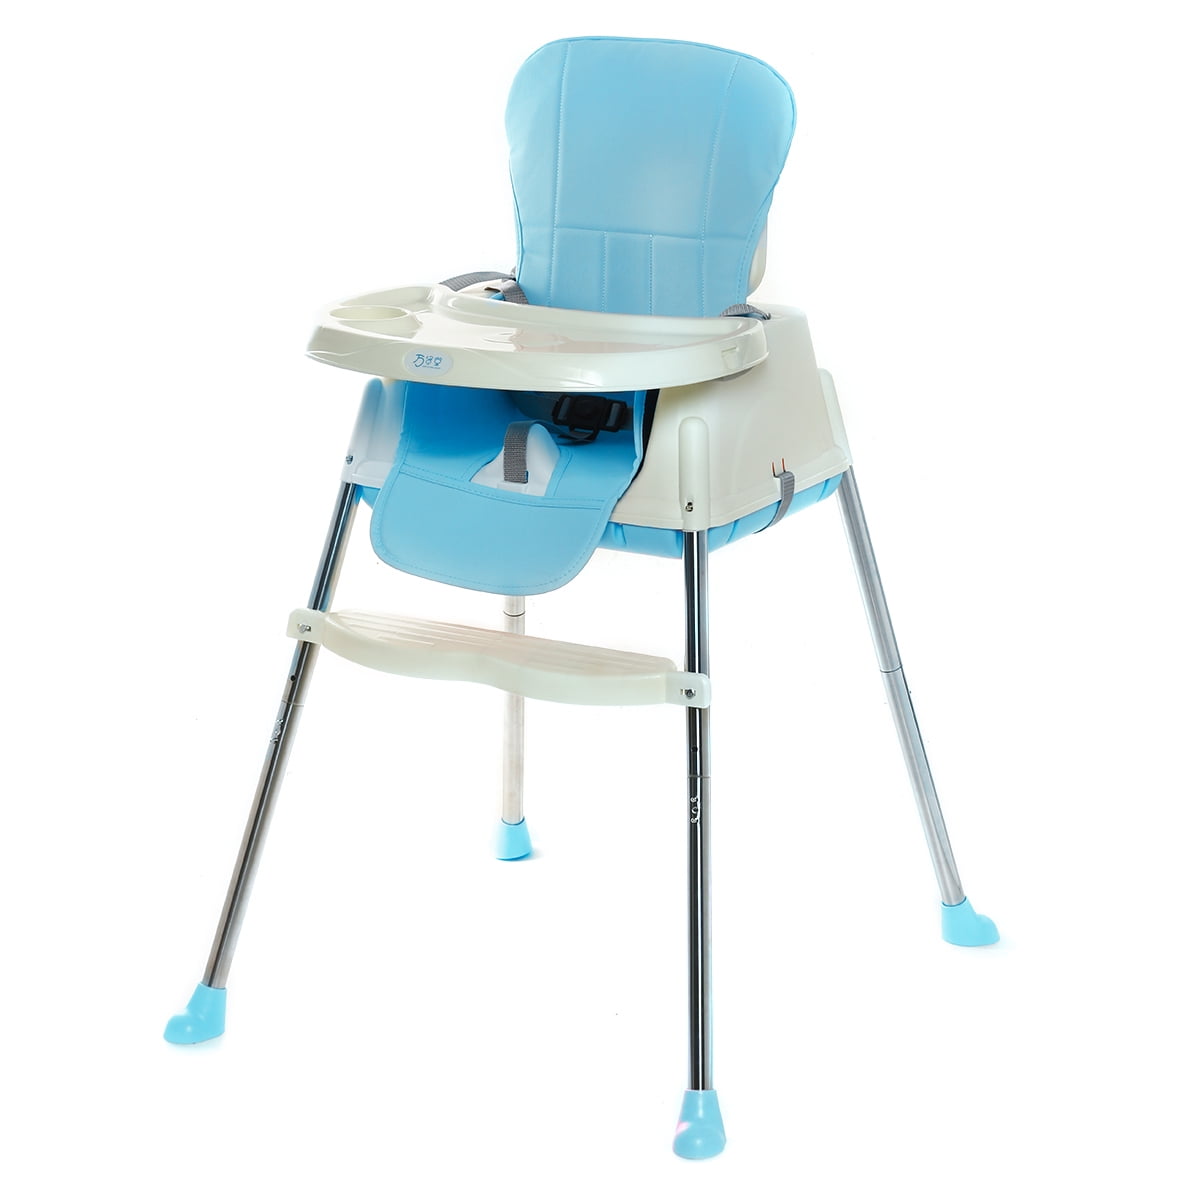 Foldable 3 in 1 Baby Toddler Infant Convertible Highchair Feeding Seat Chair 